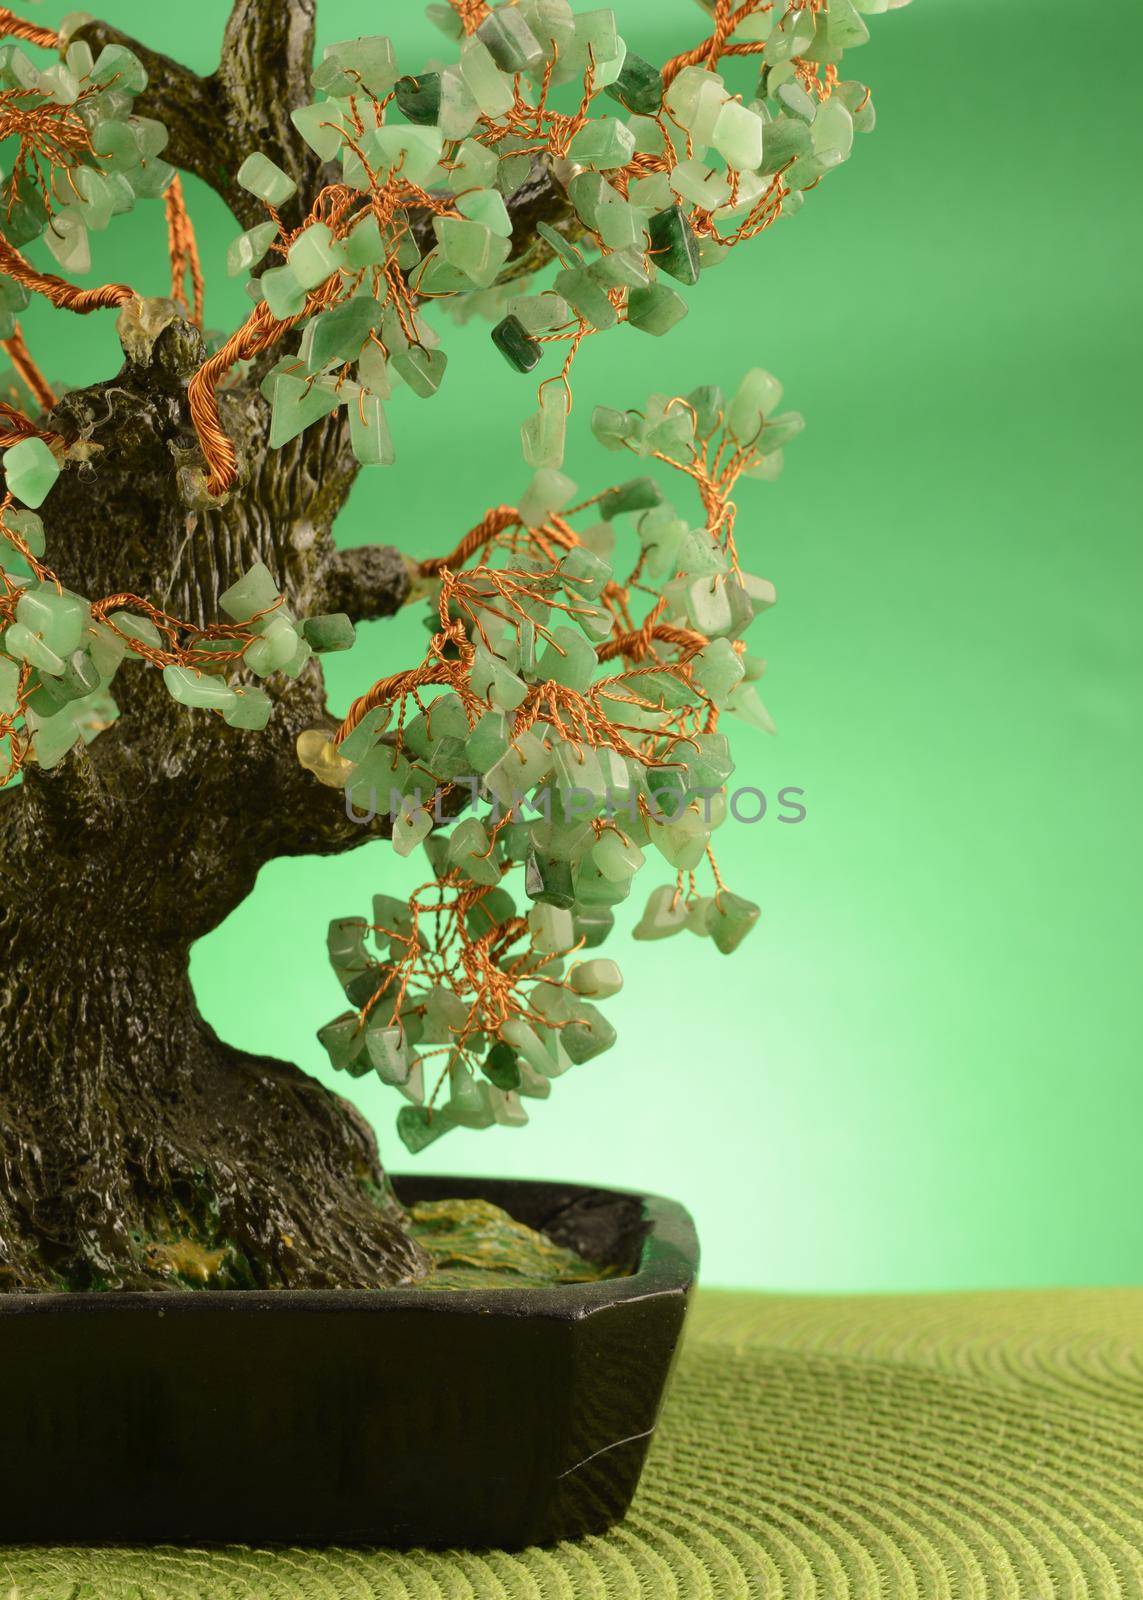 A closeup of a green jade stone money tree in a green surrounding environment to enrich viewers with the law of attraction and wealth.